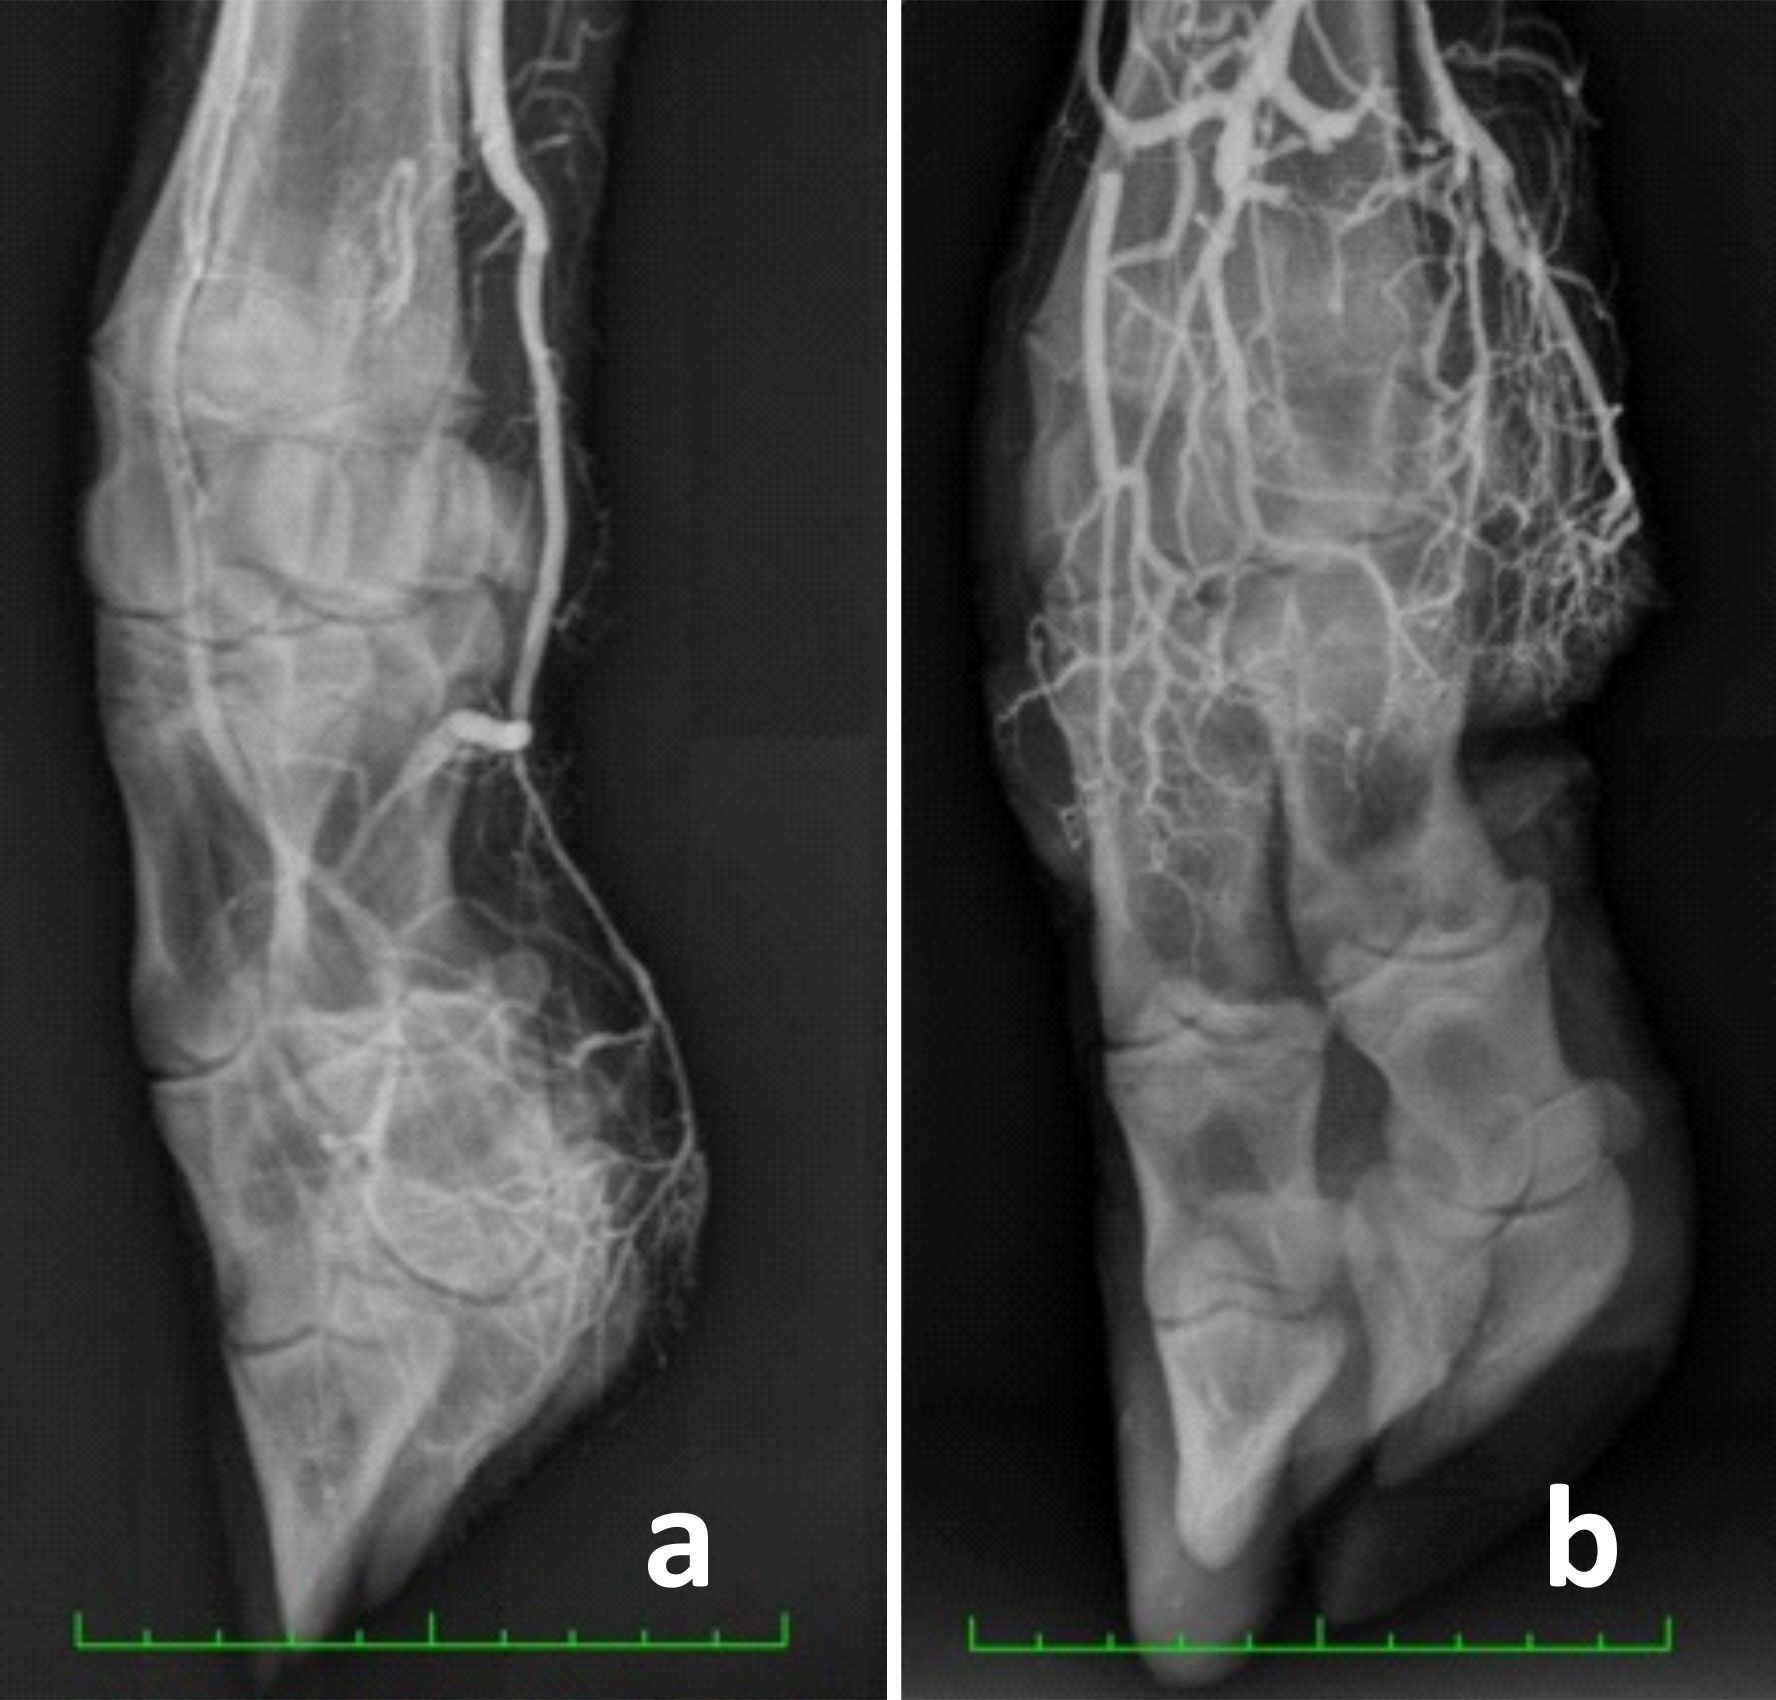 These X-rays illustrate vasoconstriction in cattle, comparing normal blood flow, left, to restricted blood flow, right, caused by ingestion of toxic fall fescue. Courtesy Terry Swecker, Virginia Tech.